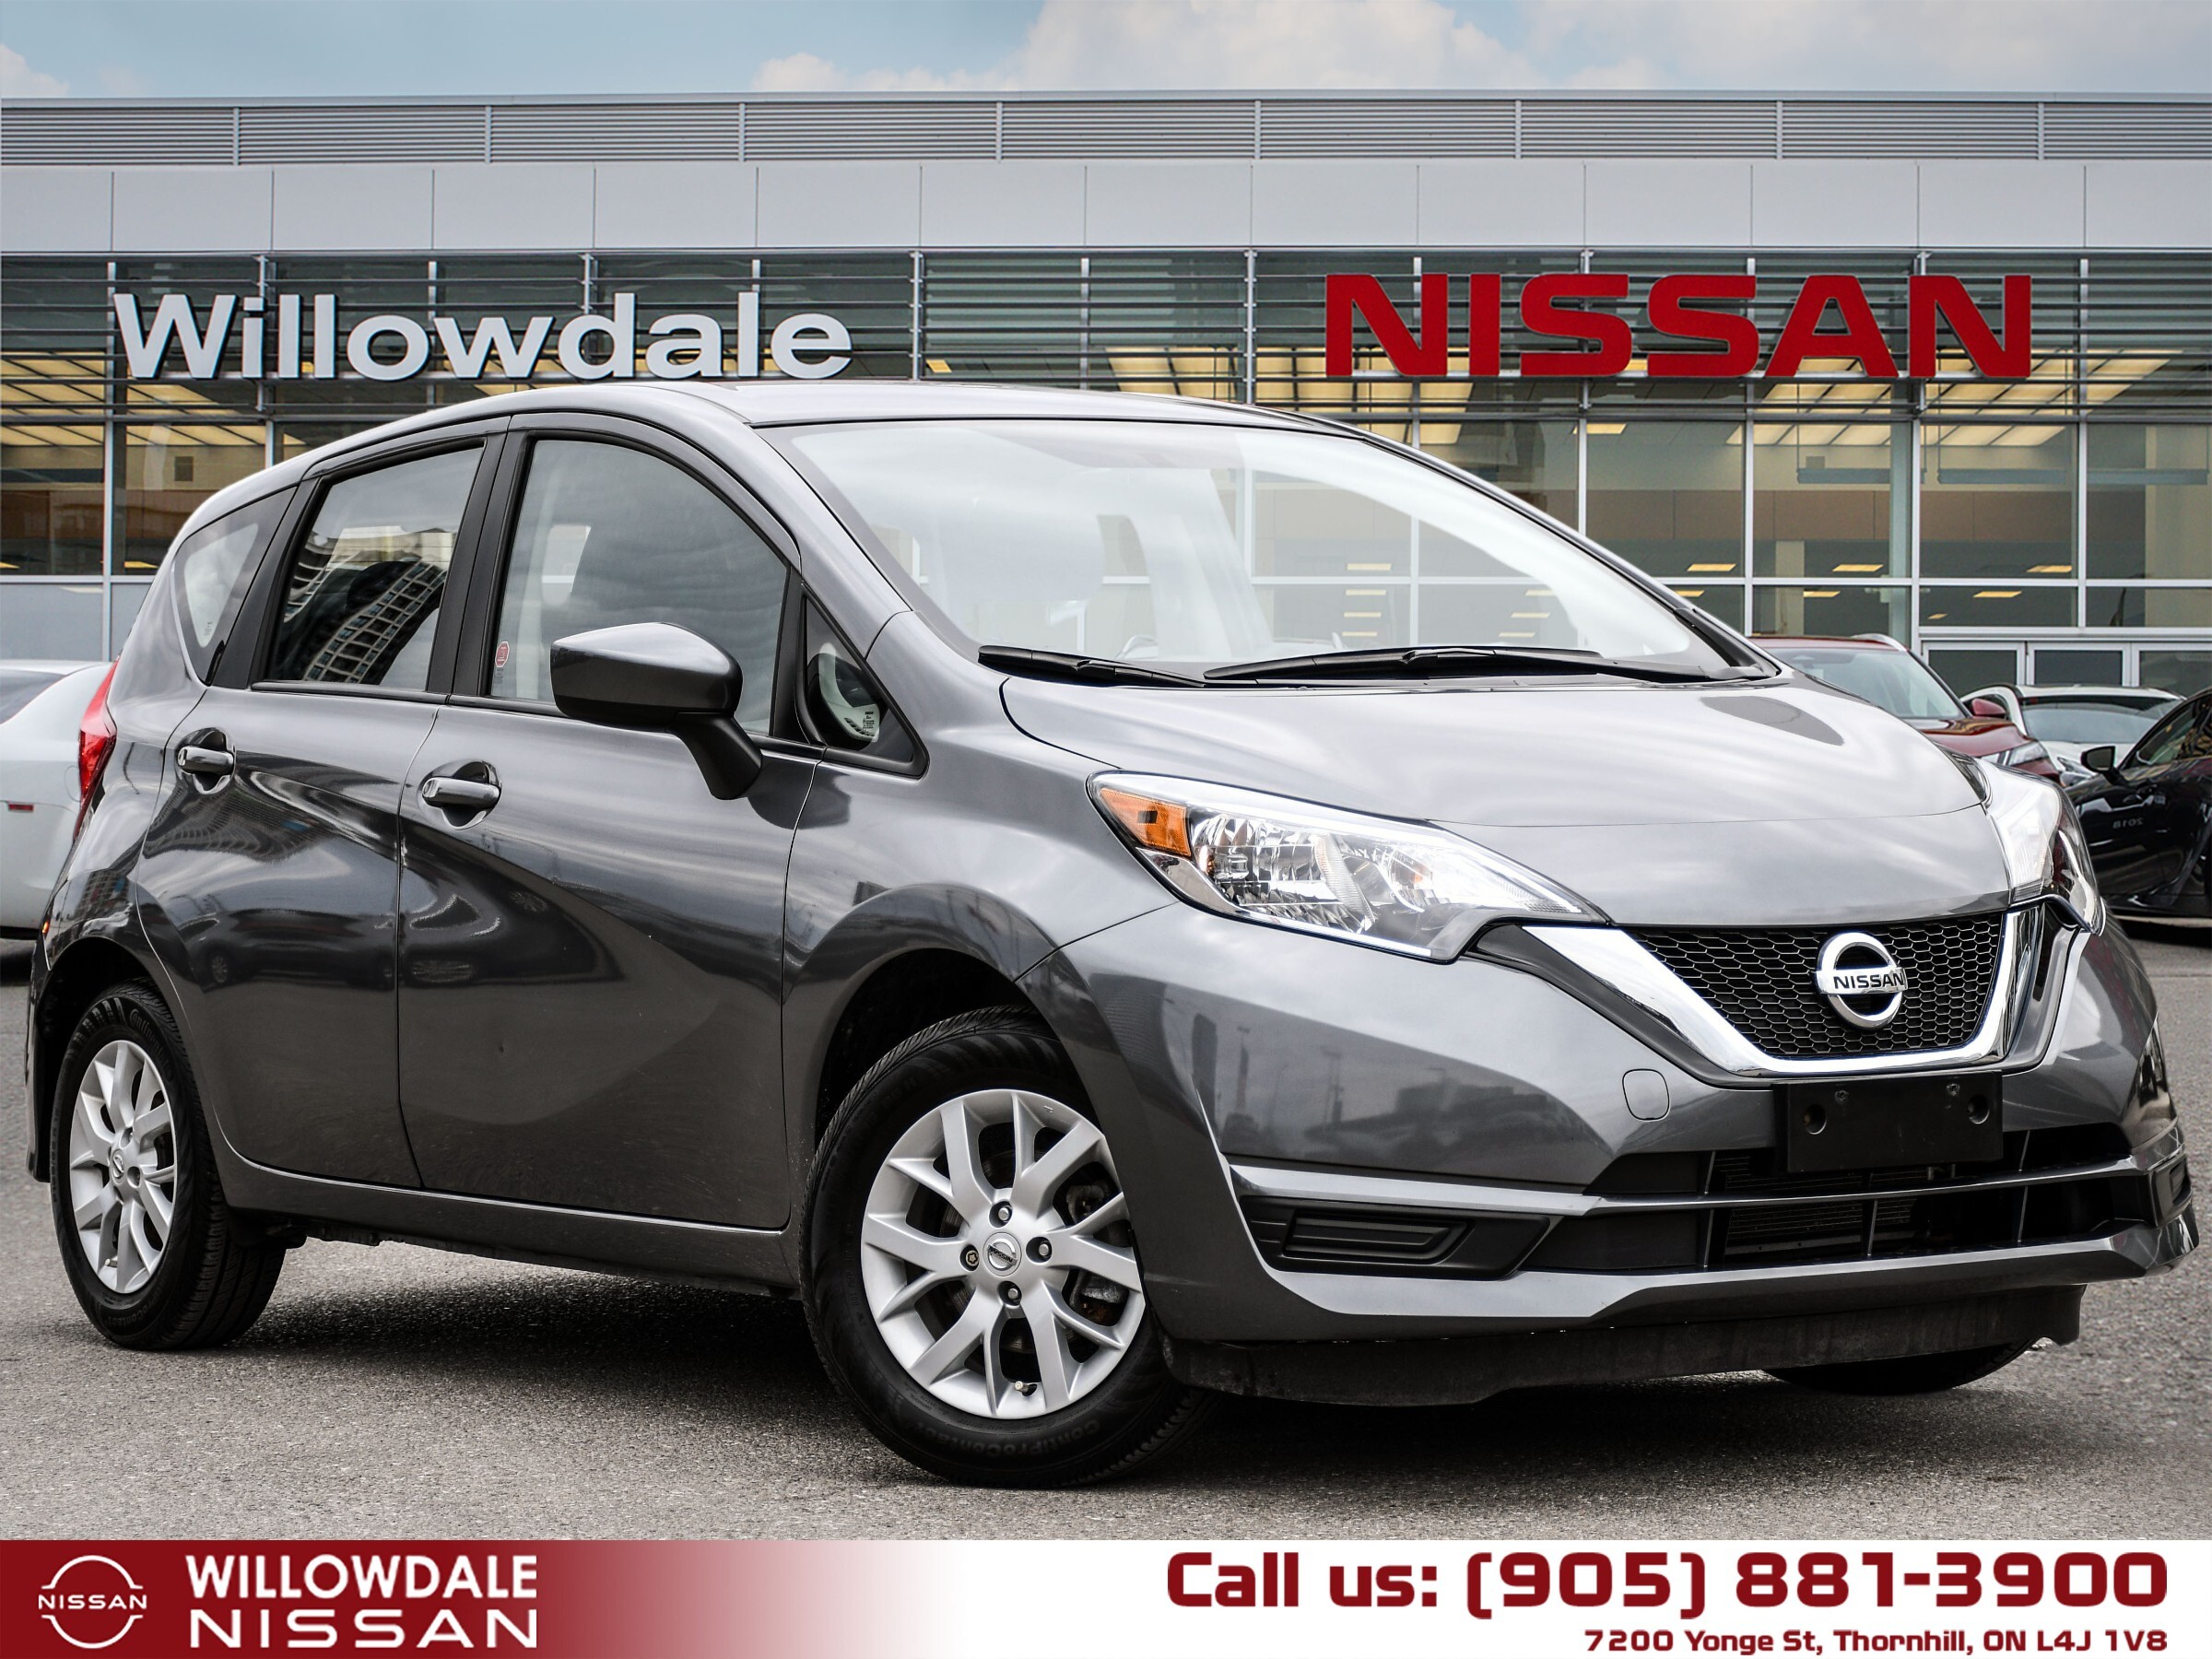 2019 Nissan Versa Note S - SALE EVENT MAY 24- MAY 25